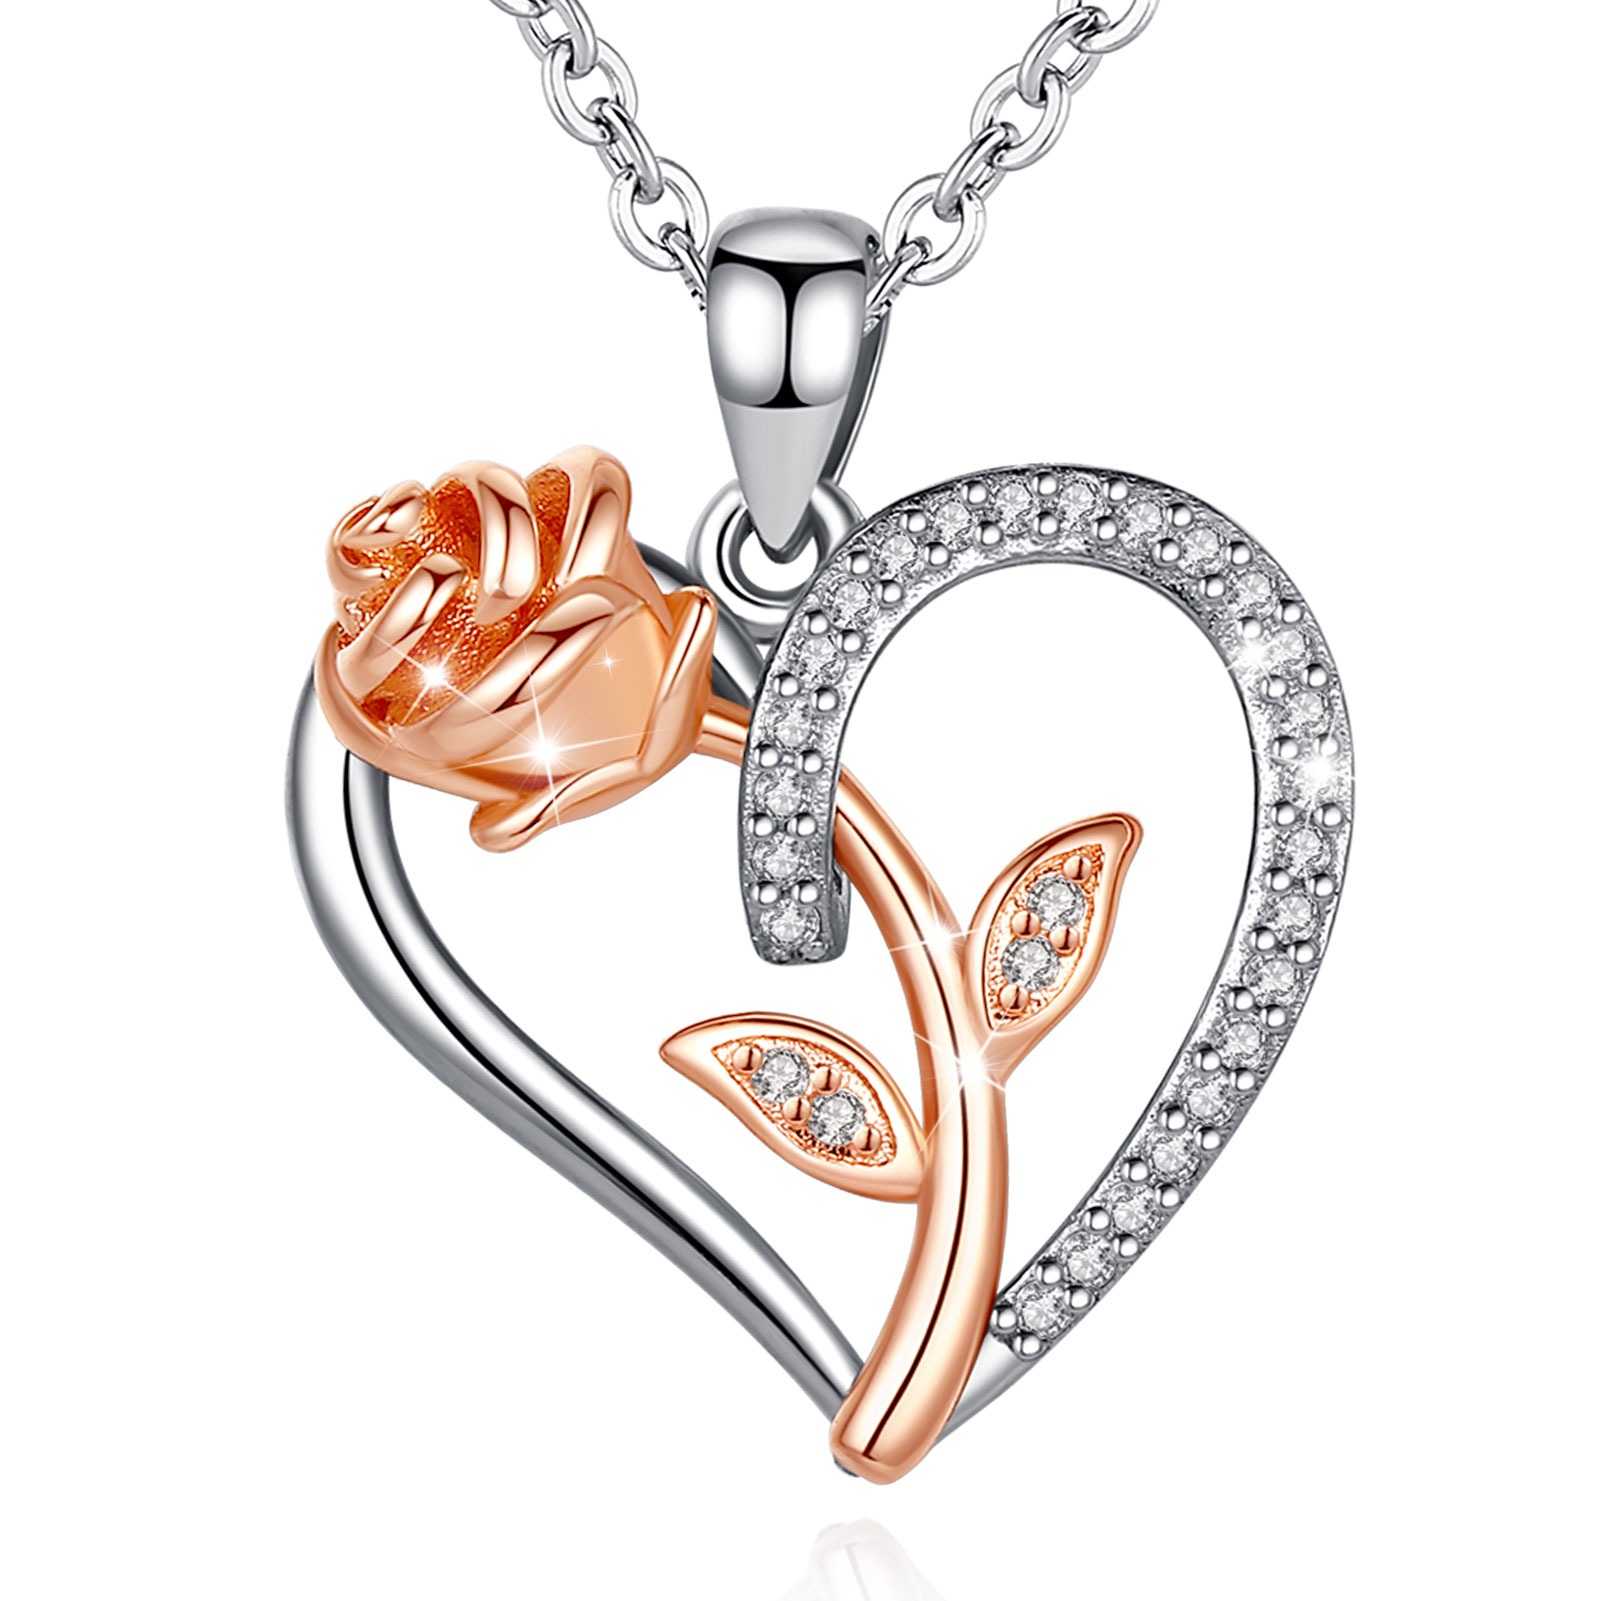 Merryshine Jewelry S925 Sterling Silver Dainty Rose Flower Pendant Necklace With Cubic Zirconia